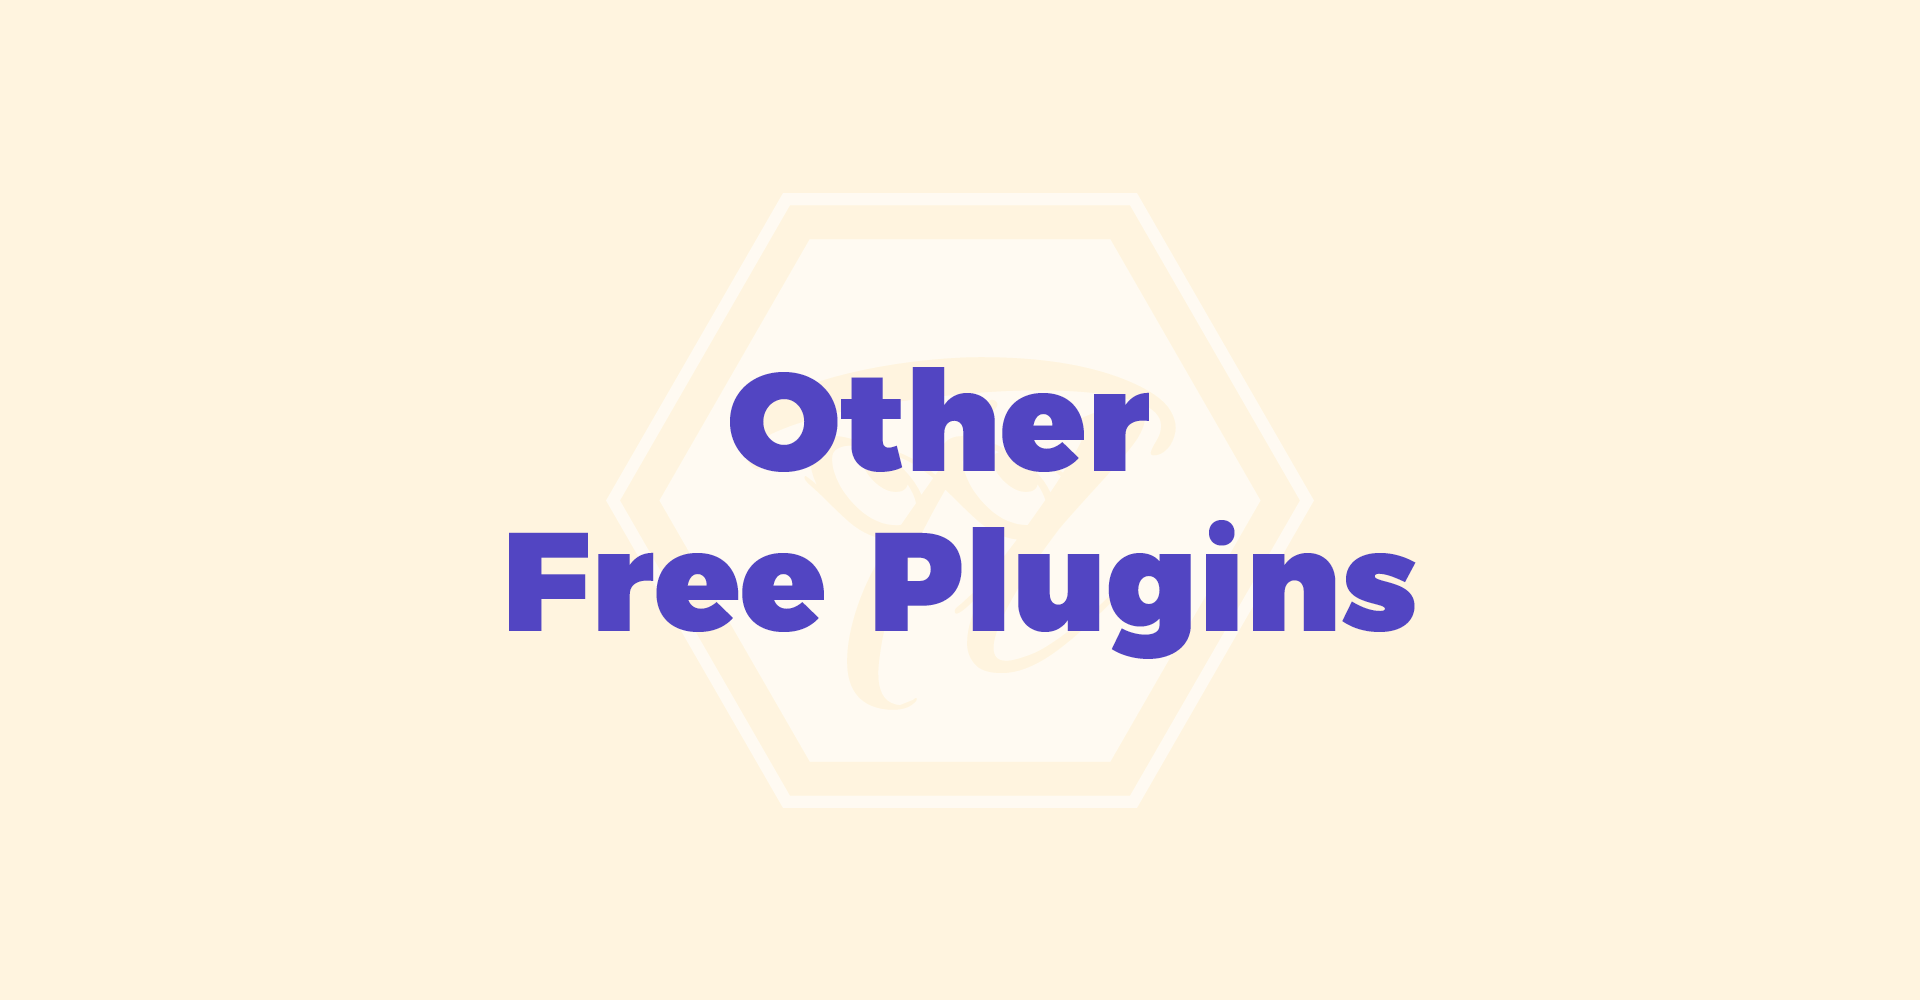 other_free_plugins 1 1